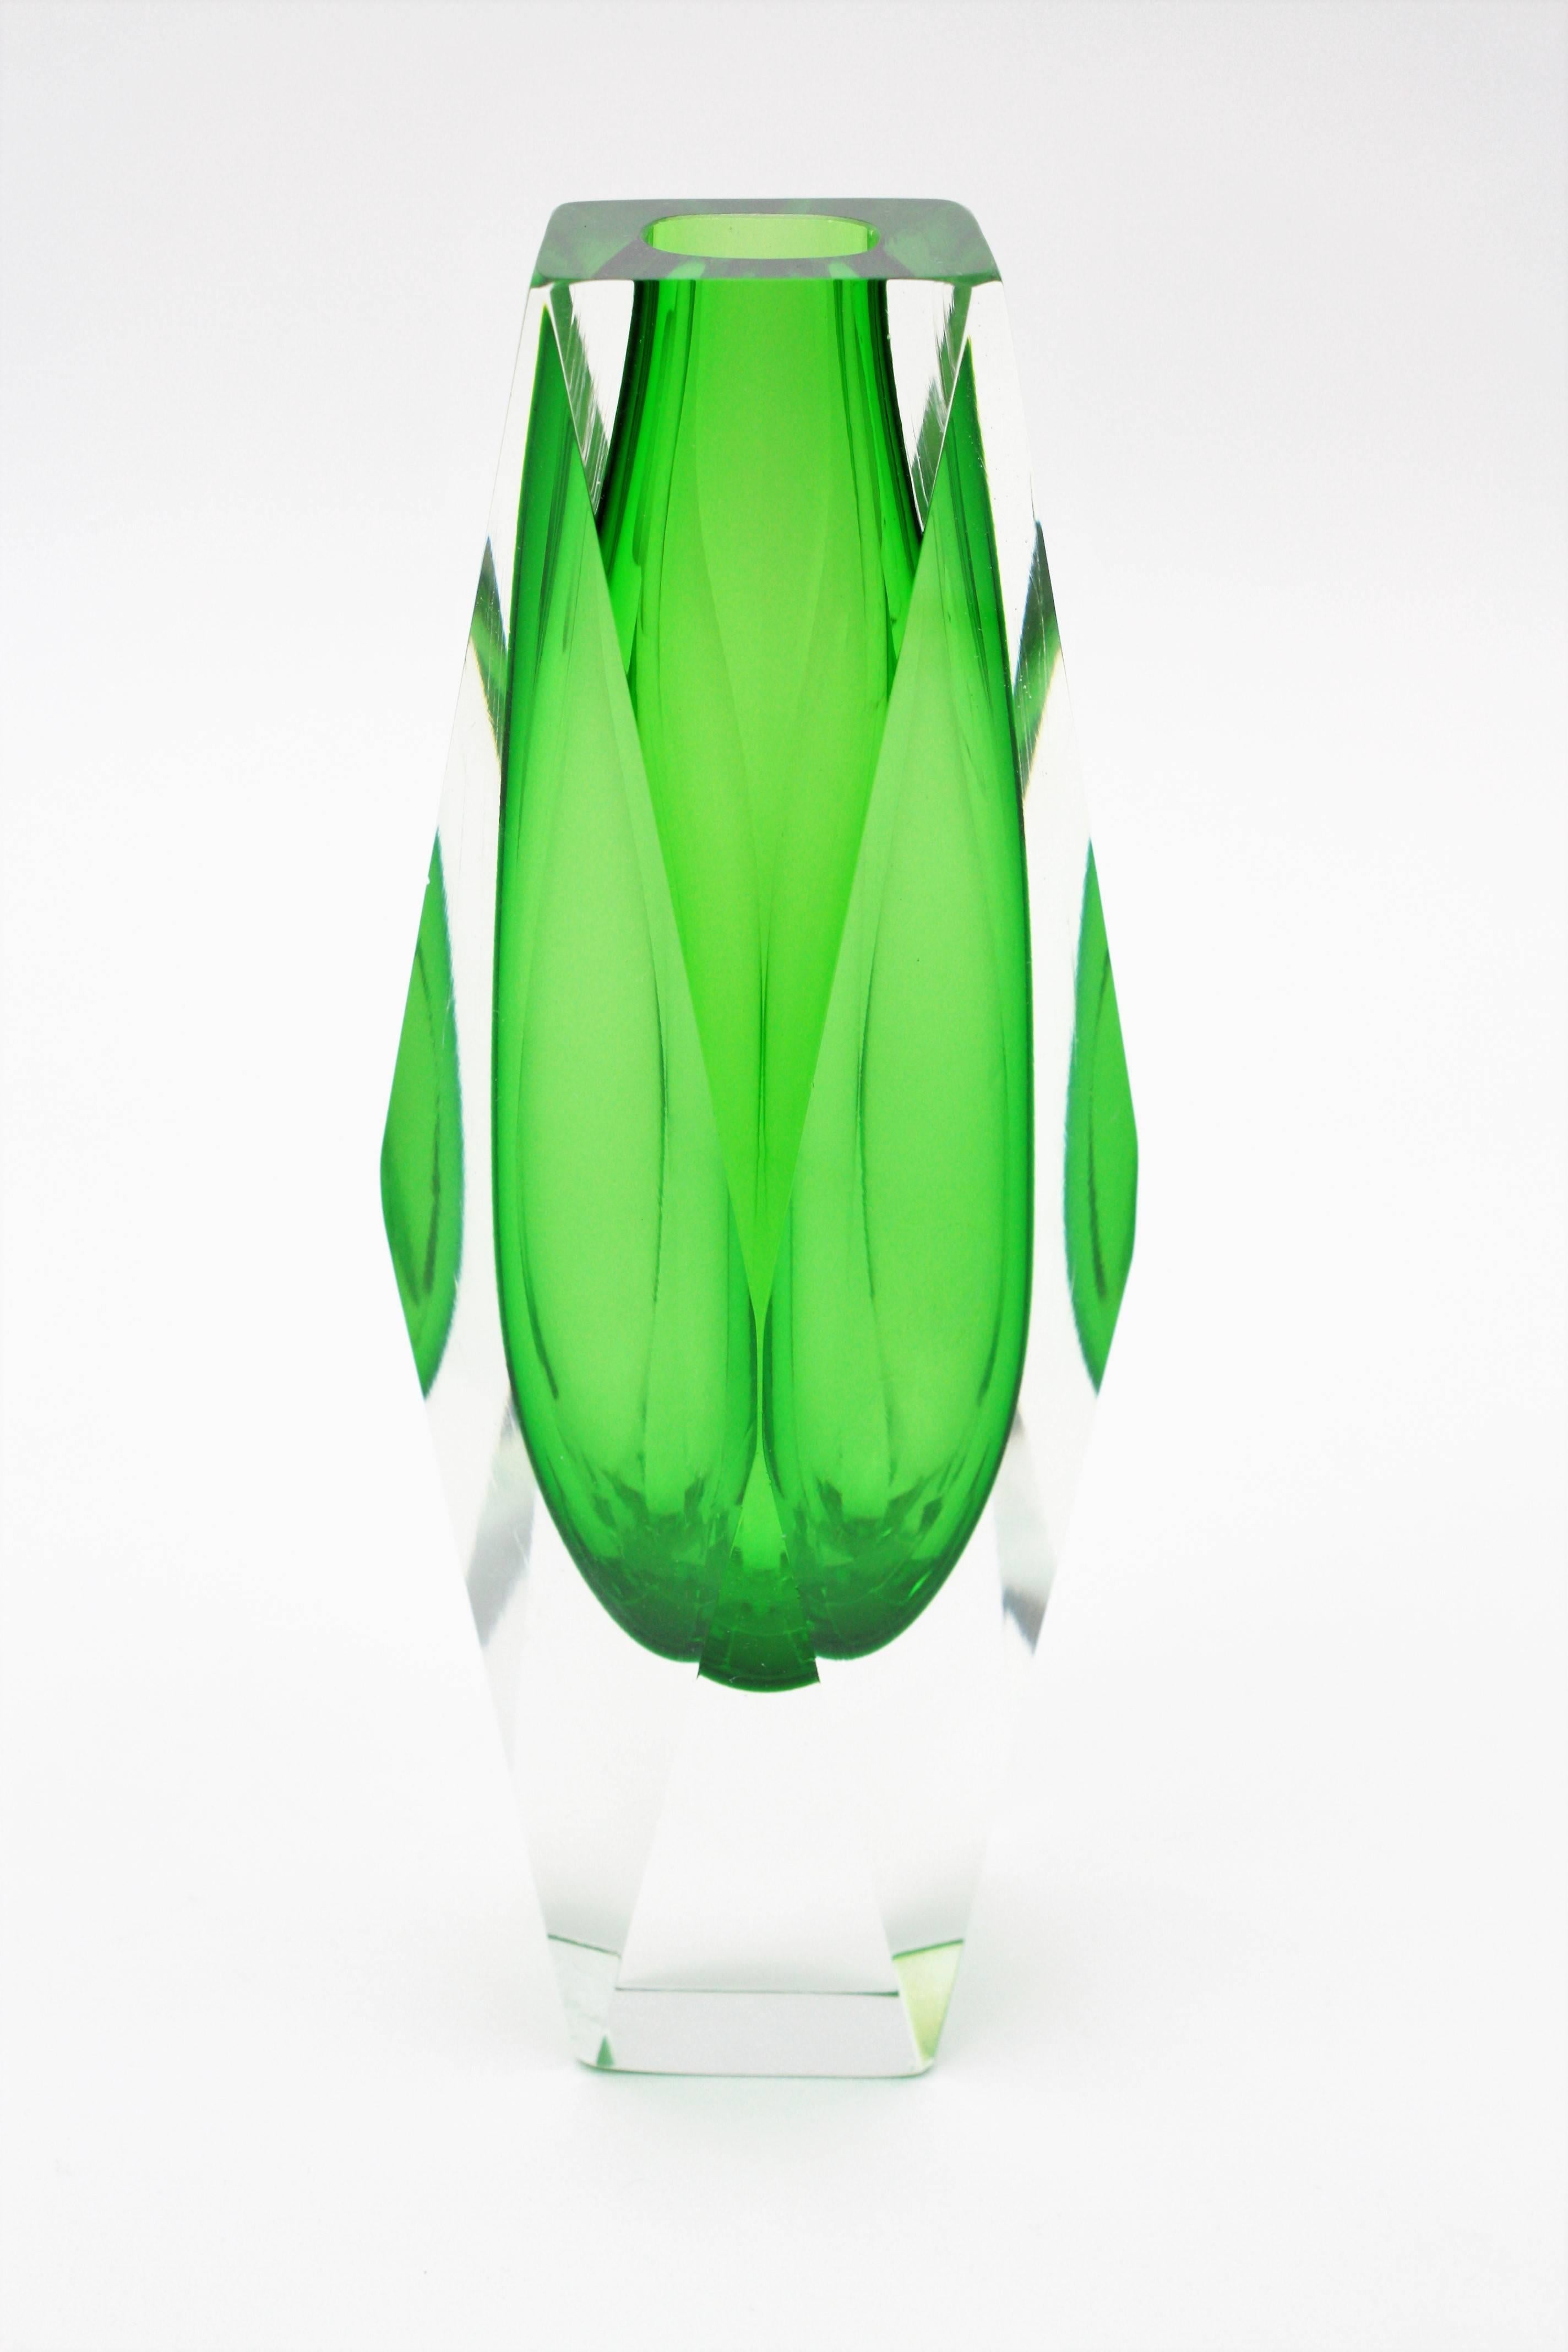 A beautiful Sommerso vase with faceted glass in a vibrant Lime green color cased into clear glass. Attributed to Mandruzzato, Italy, 1960s.

Excellent condition. No chips, no cracks to notice.

Available other Murano glass pieces:
Please, kindly